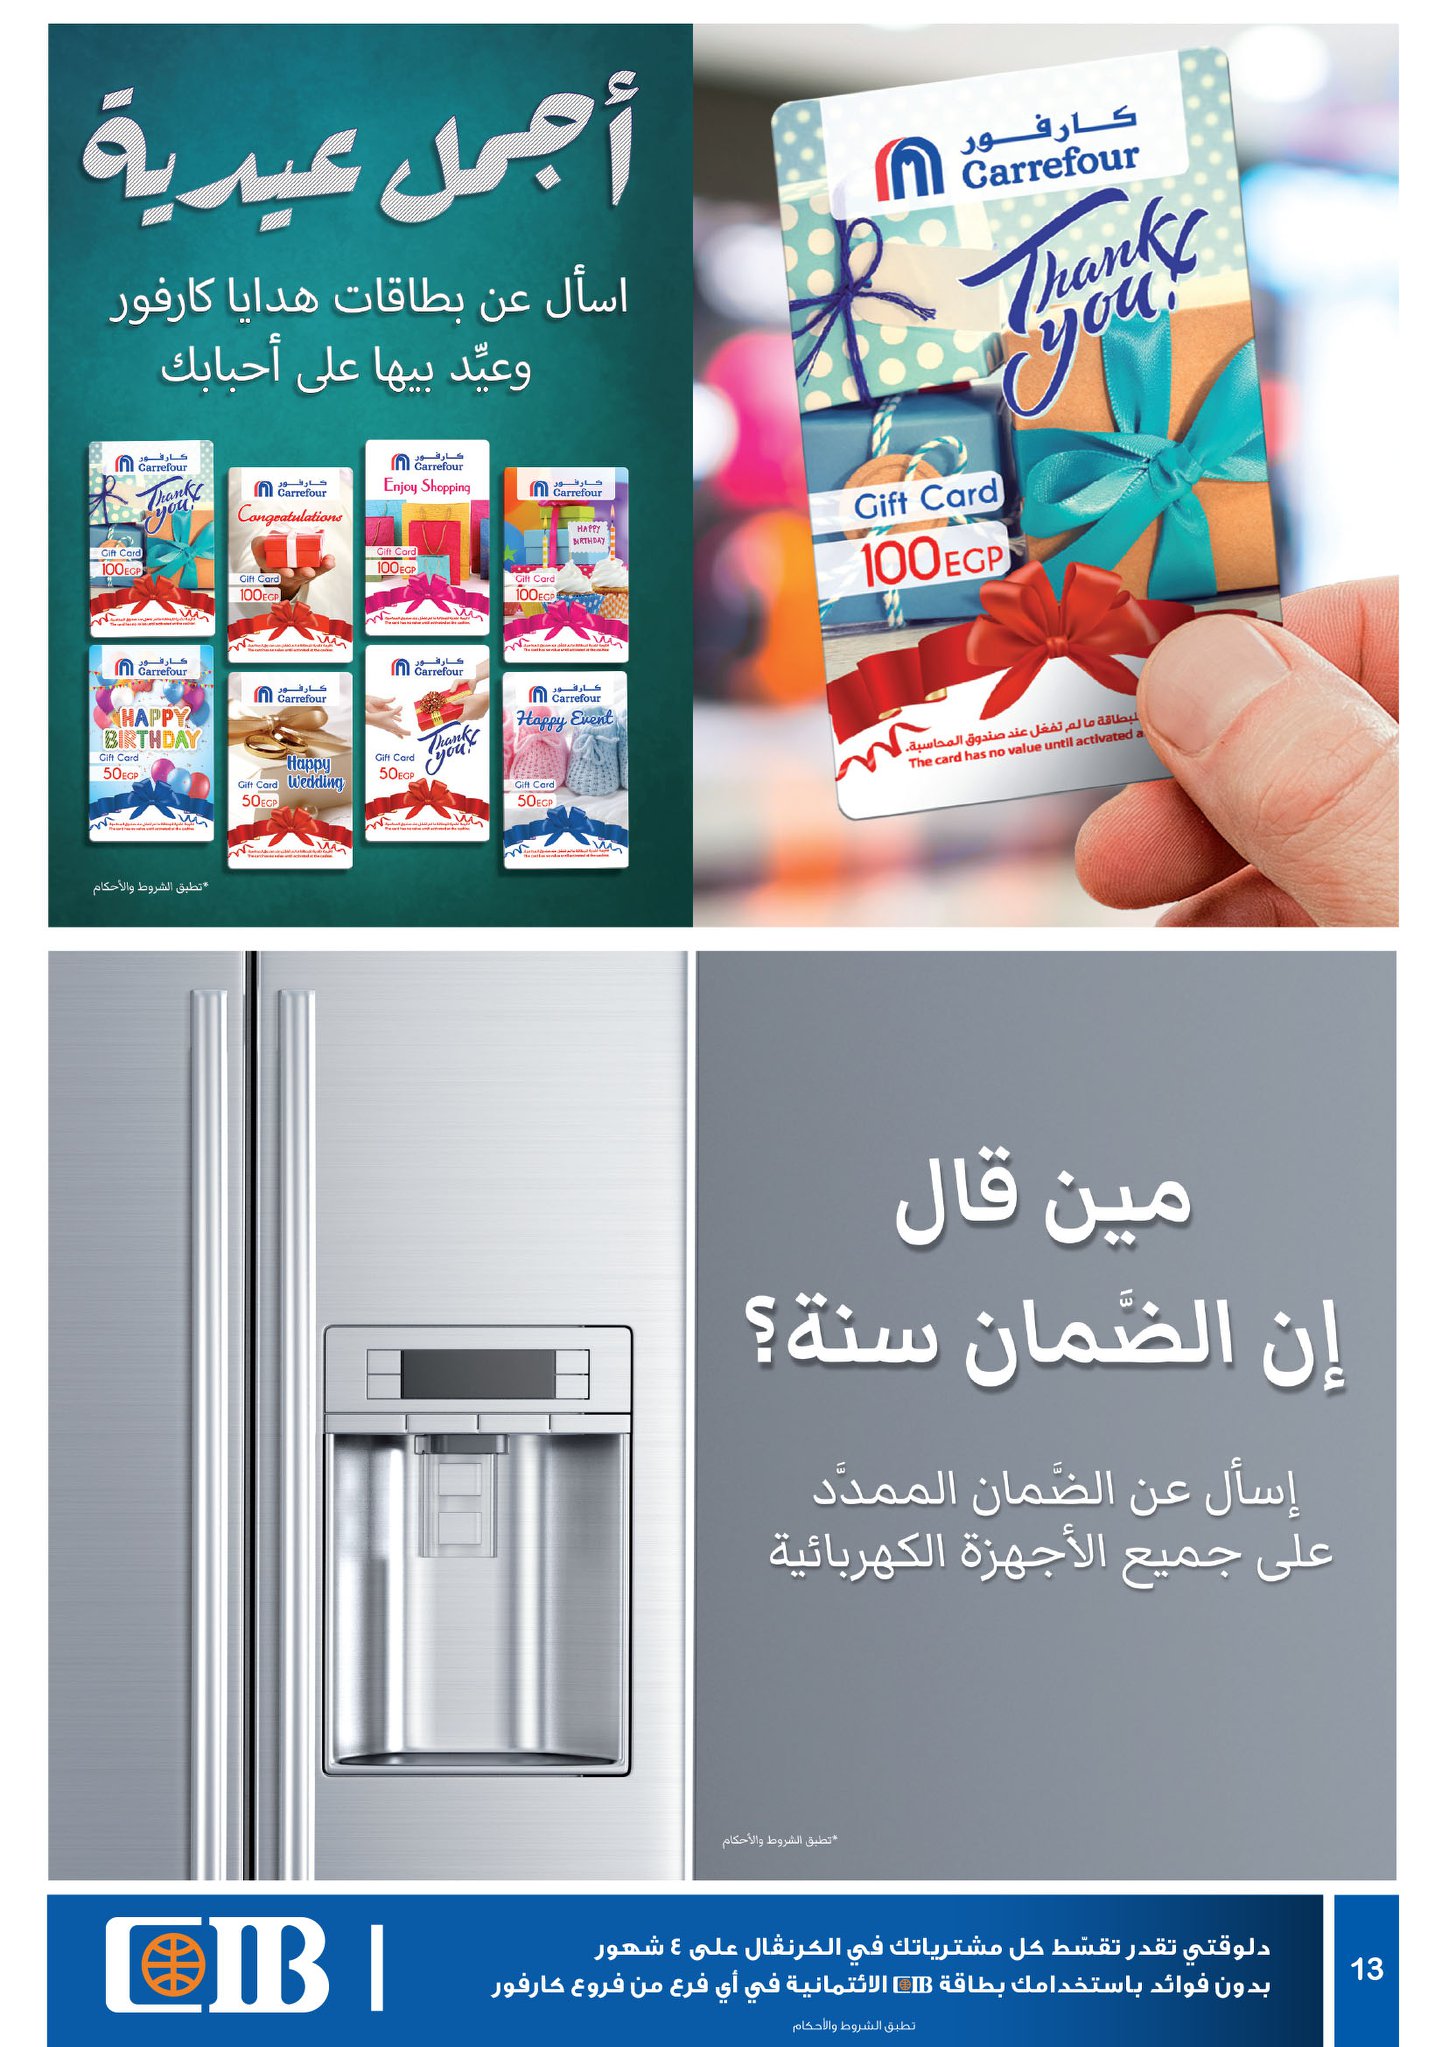 Carrefour Flyer from 16/7 till 27/7 | Carrefour Egypt 13